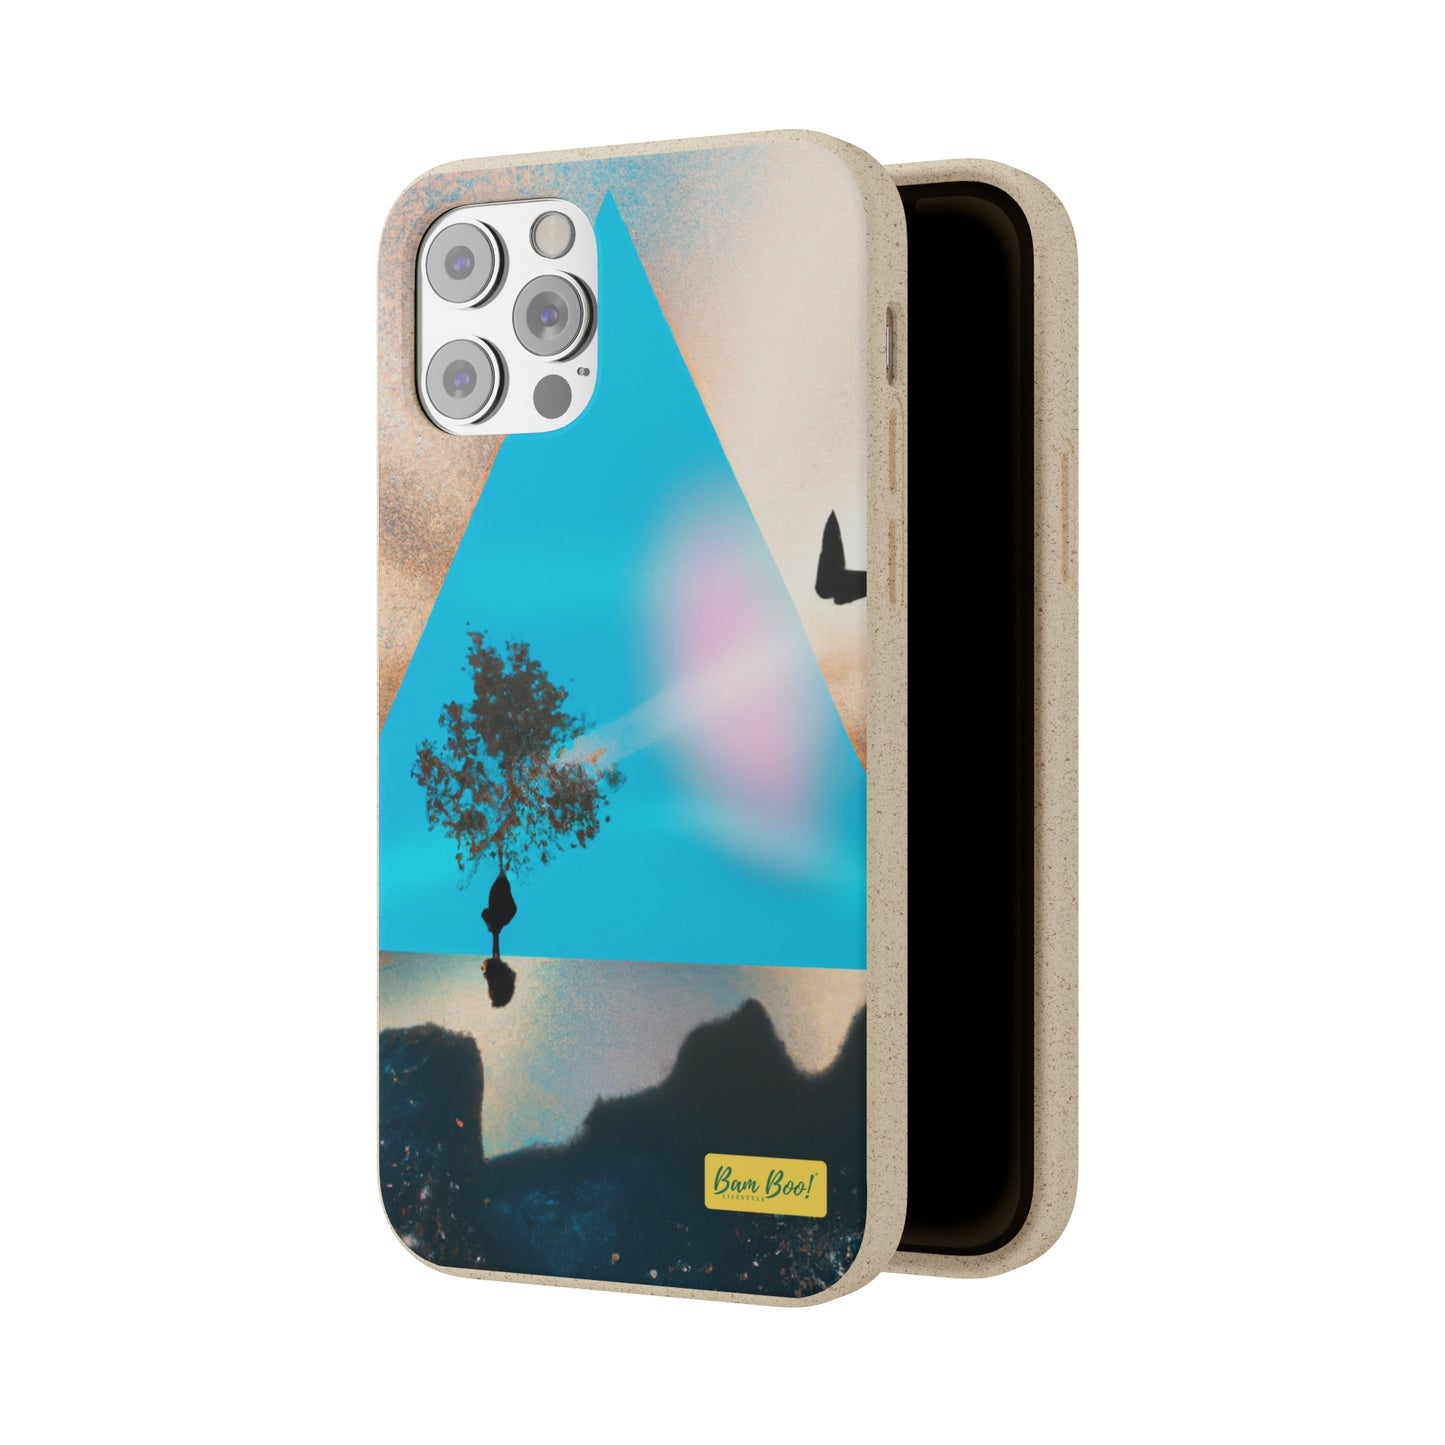 Dreamscaping a Past: Recreating Childhood Memories in Surreal Landscapes - Bam Boo! Lifestyle Eco-friendly Cases